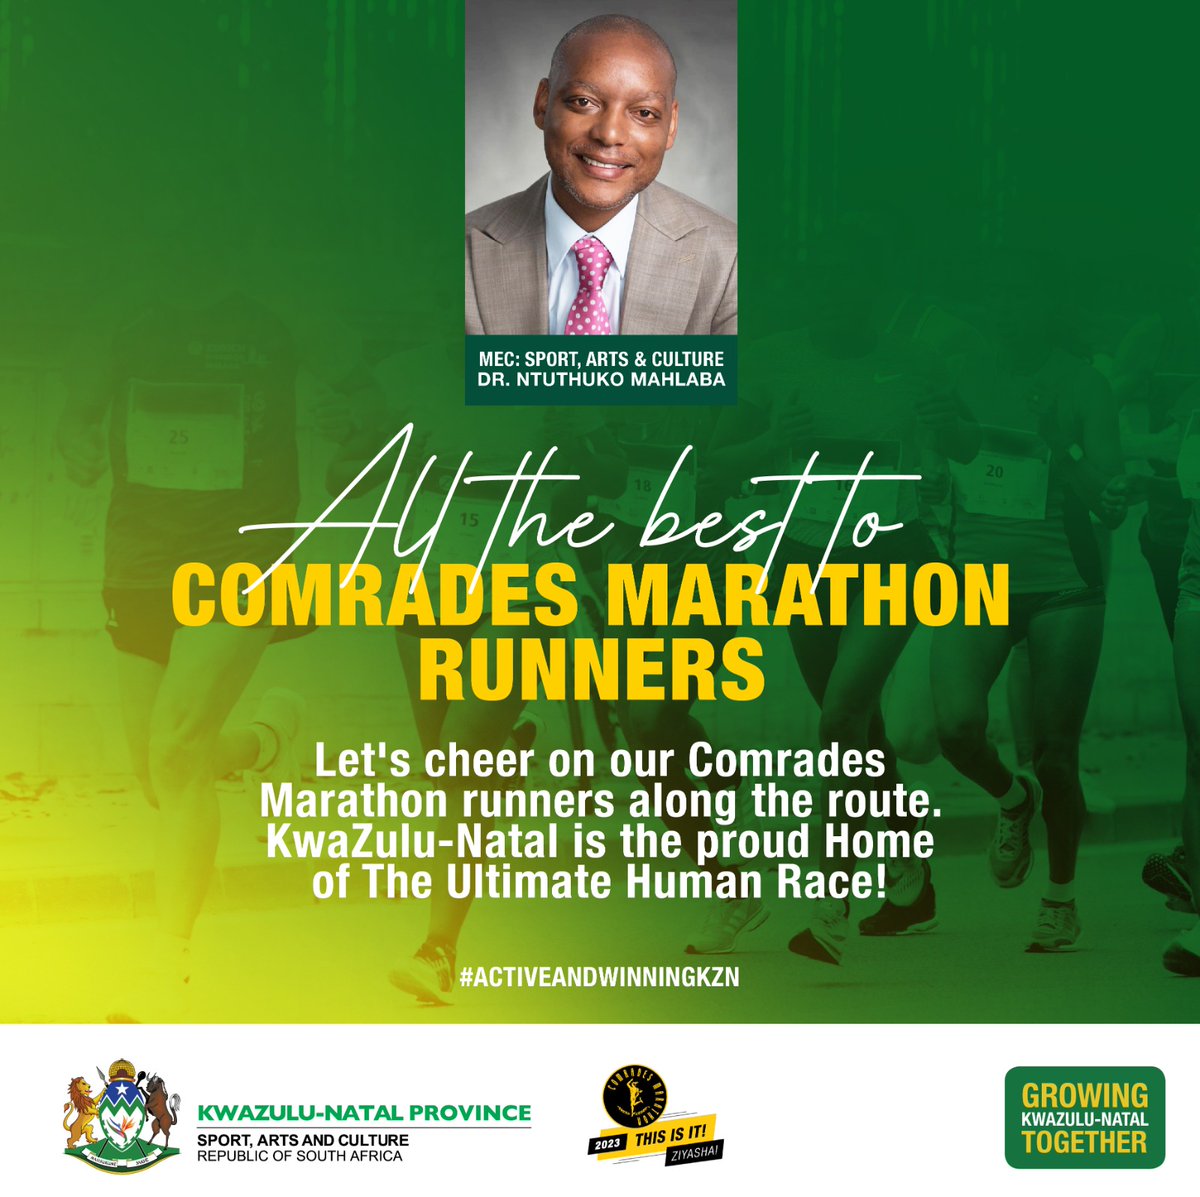 KZN MEC for @SportArtsKZN Dr Ntuthuko Mahlaba, calls on communities along the Comrades Marathon route to come out in numbers to support the runners as they tackle the 87.7km run from #Pietermartizburg to #Durban on Sunday, 11 June 2023.#ComradesMarathon2023
#activeandwinningKZN